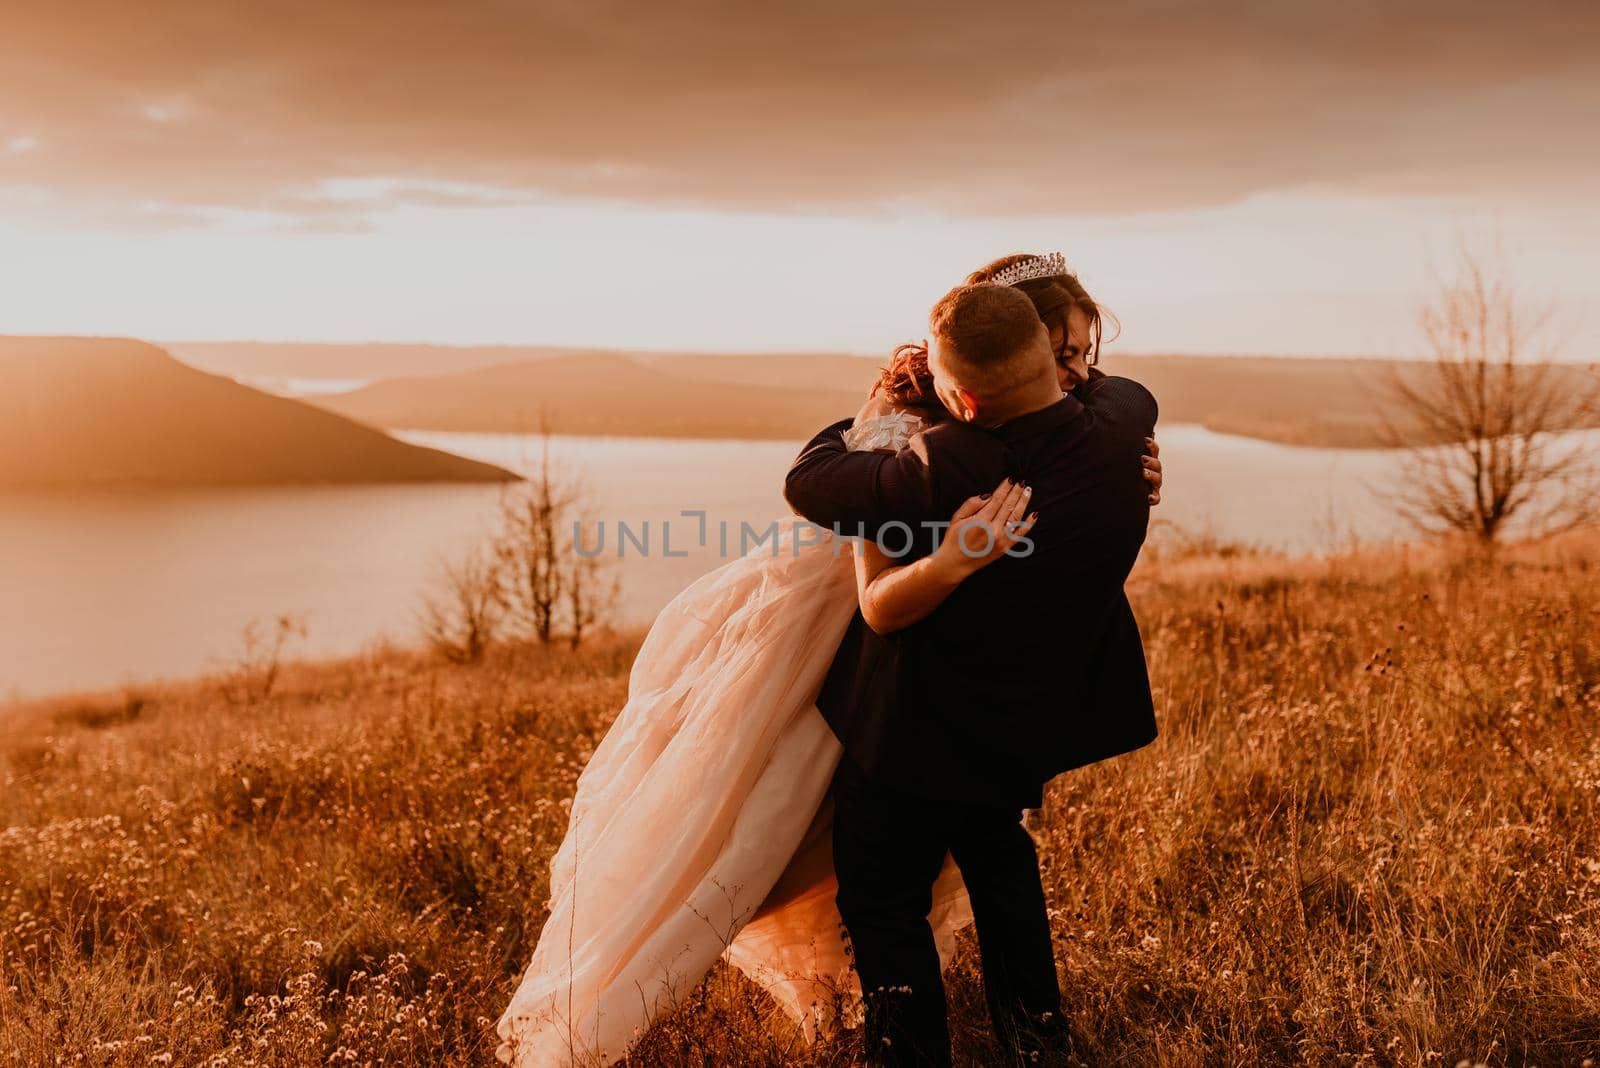 A loving couple wedding newlyweds in a white dress and a suit walk run smile happy on tall grass in the summer field on the mountain above the river. sunset.